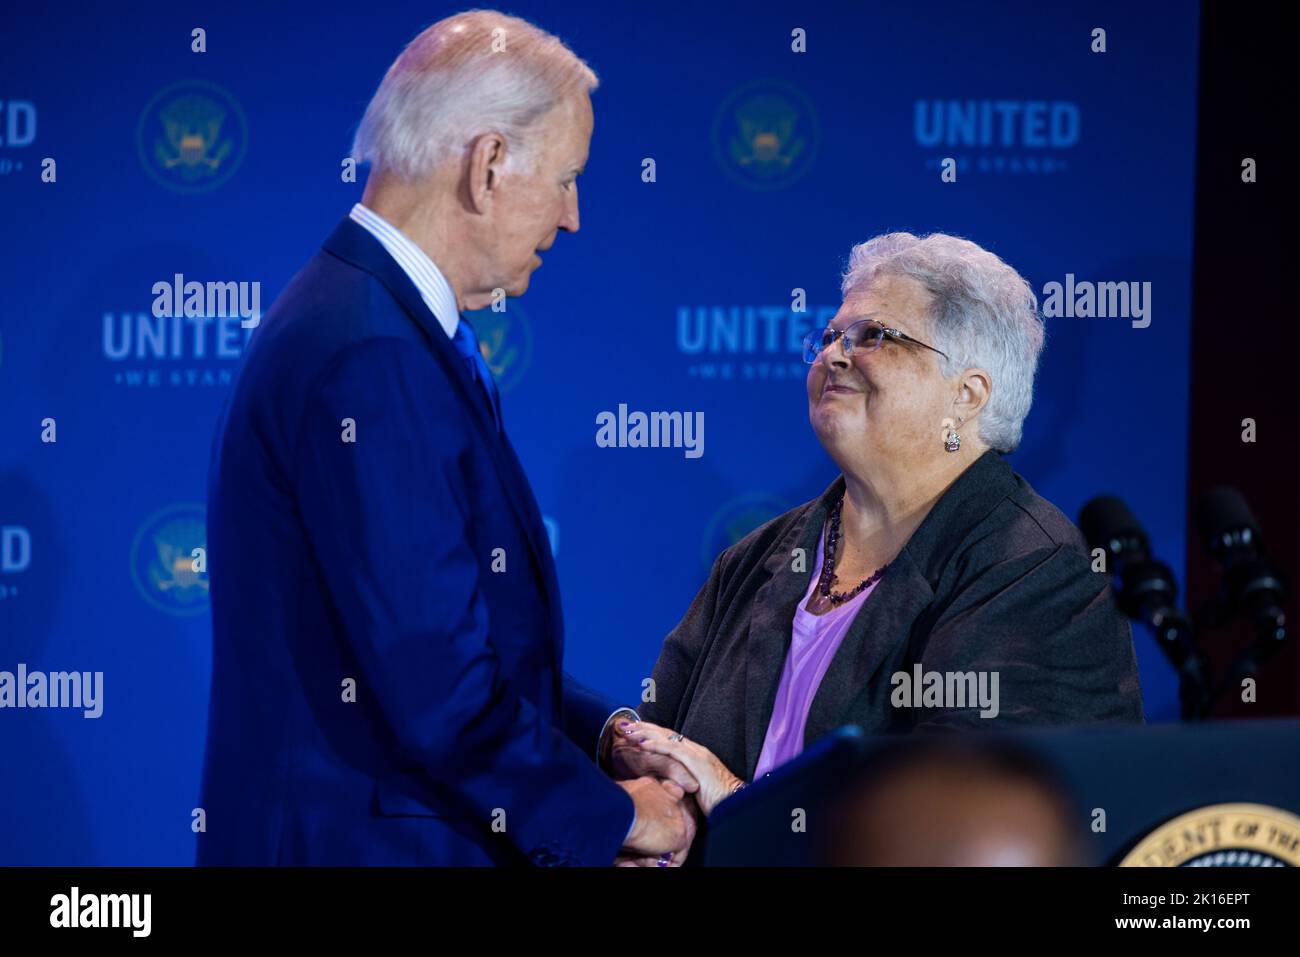 Washington DC, USA. 15th Sep, 2022. United States President Joe Biden shakes hands with Susan Bro, right, mother of Heather Heyer, who was killed at the Unite the Right rally in Charlottesville, Virginia in 2017, prior to making remarks at the United We Stand Summit in the East Room of the White House in Washington DC, USA, 15 September 2022. Credit: Jim LoScalzo/Pool via CNP/dpa/Alamy Live News Stock Photo